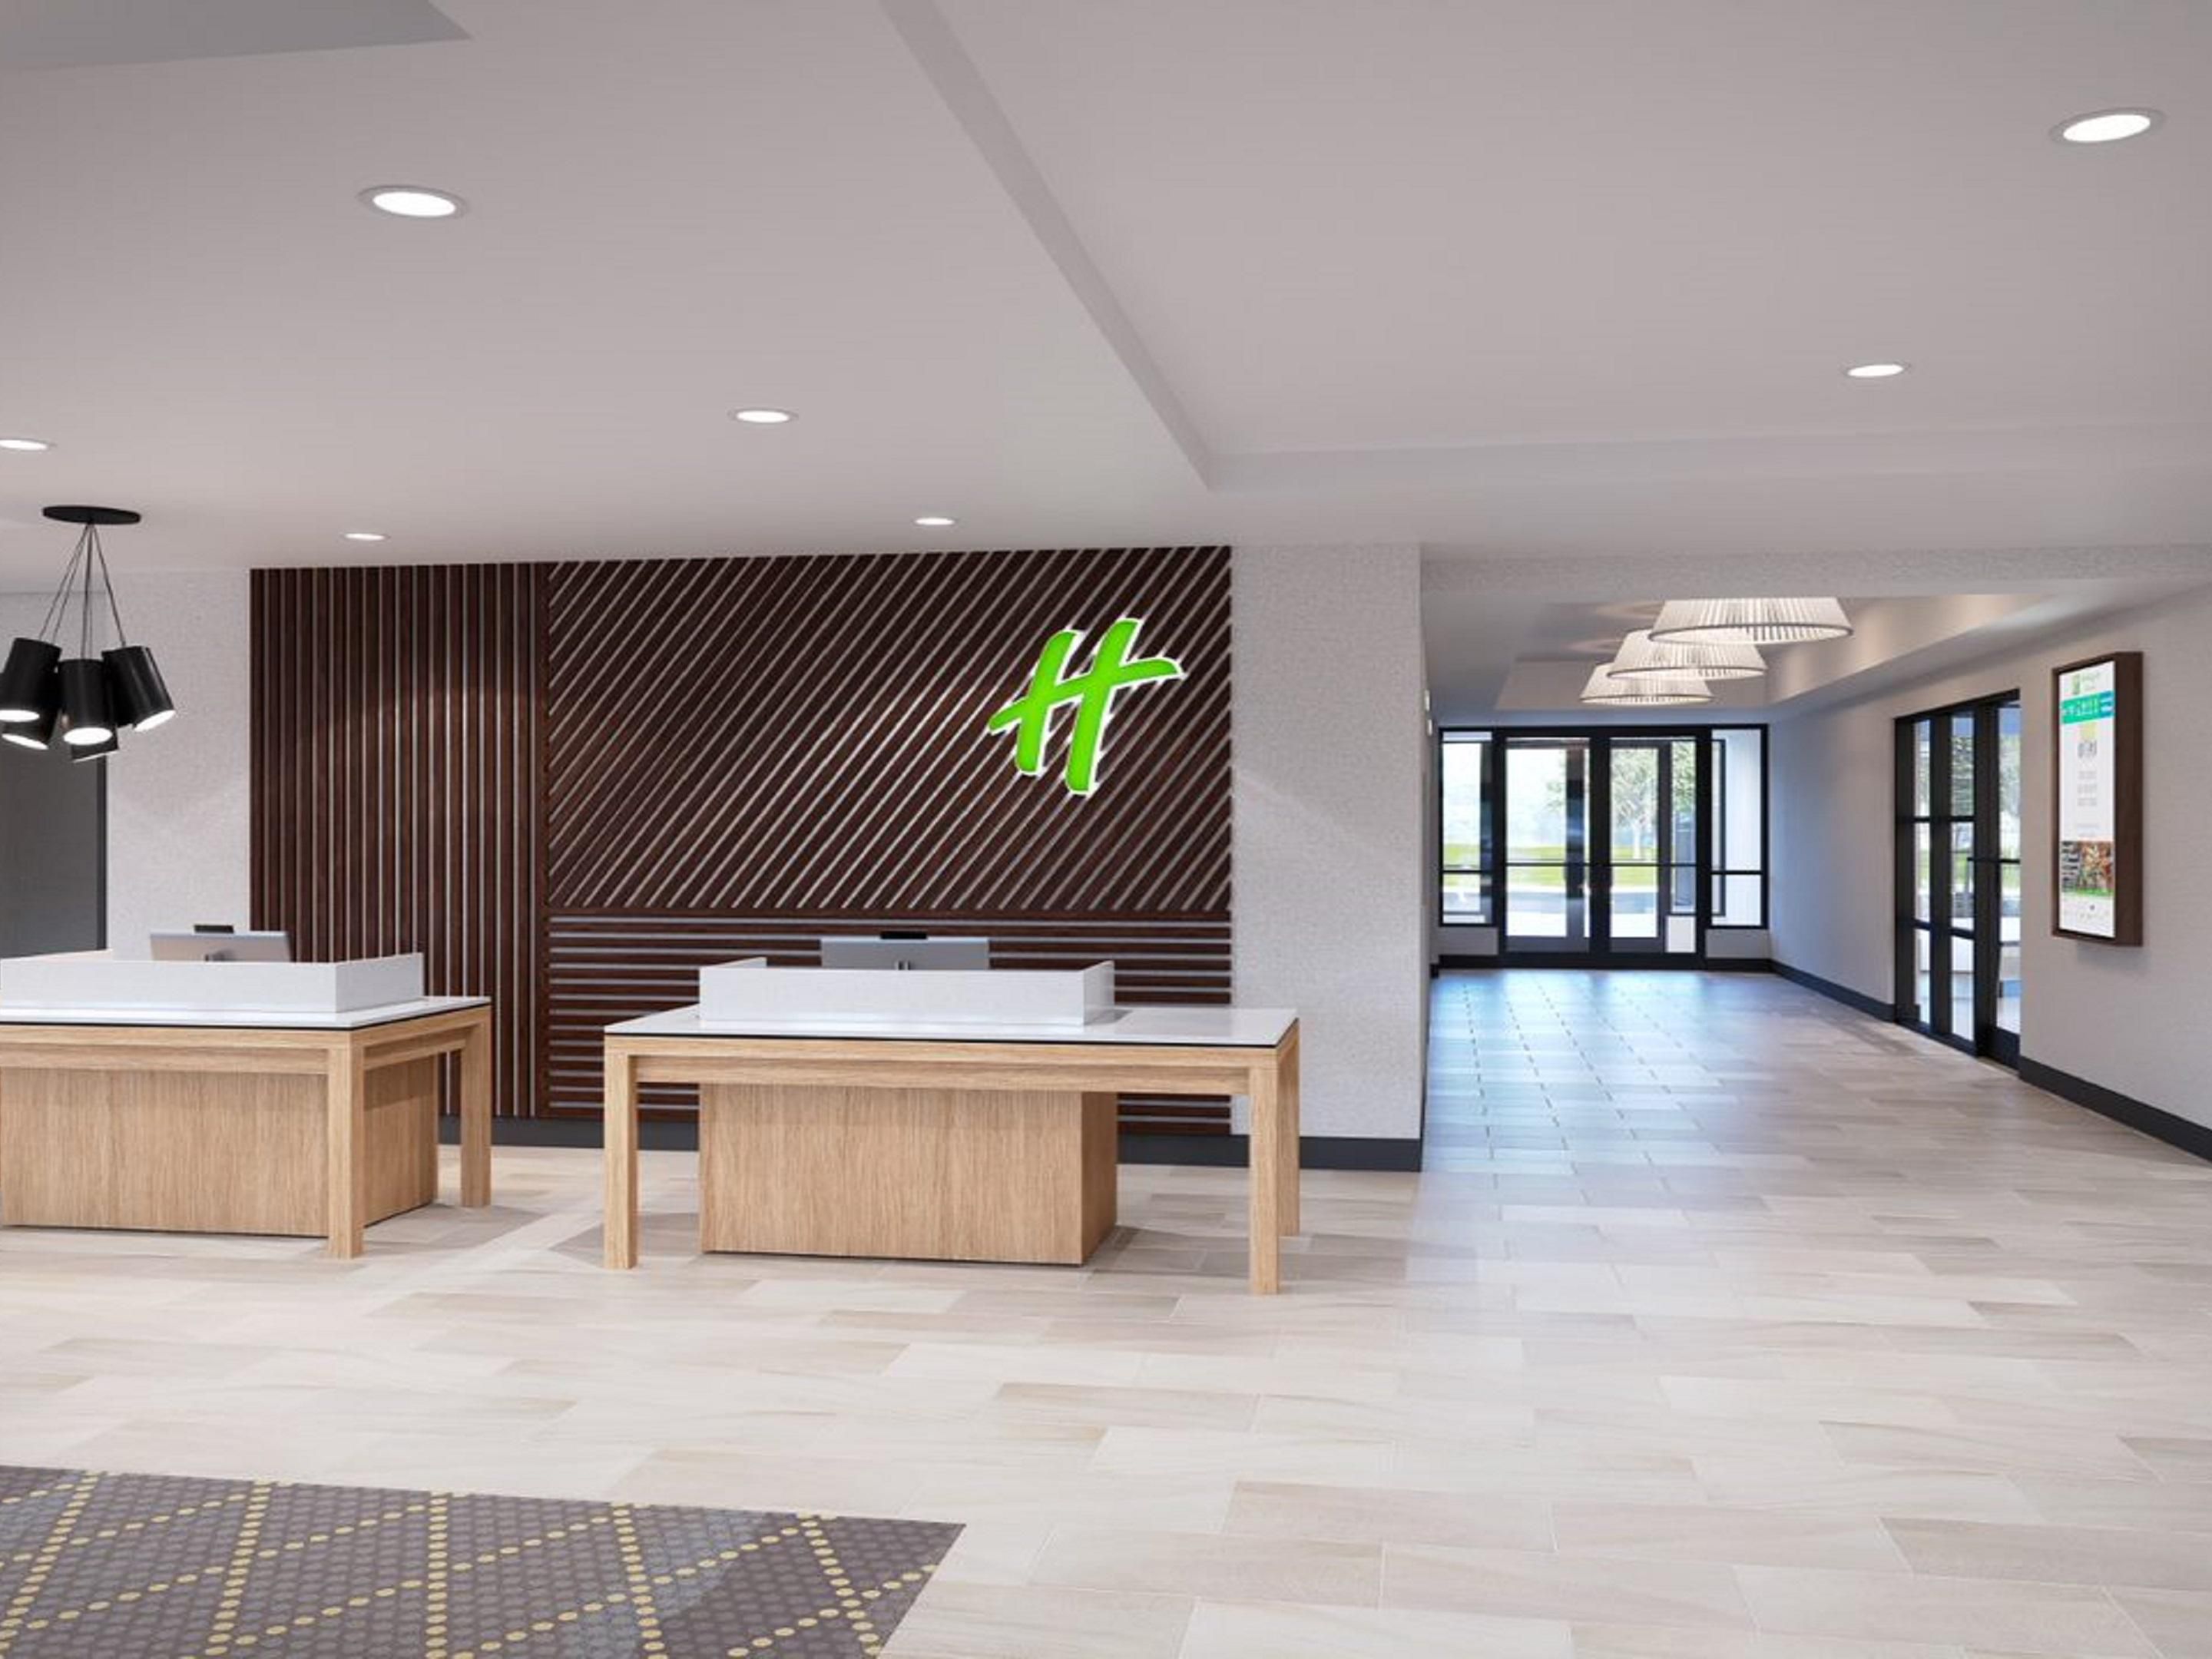 Enjoy our open lobby concept, designed to give you space to work, play or connect with friends, colleagues and family.  Have a drink, a bite to eat, or just relax.